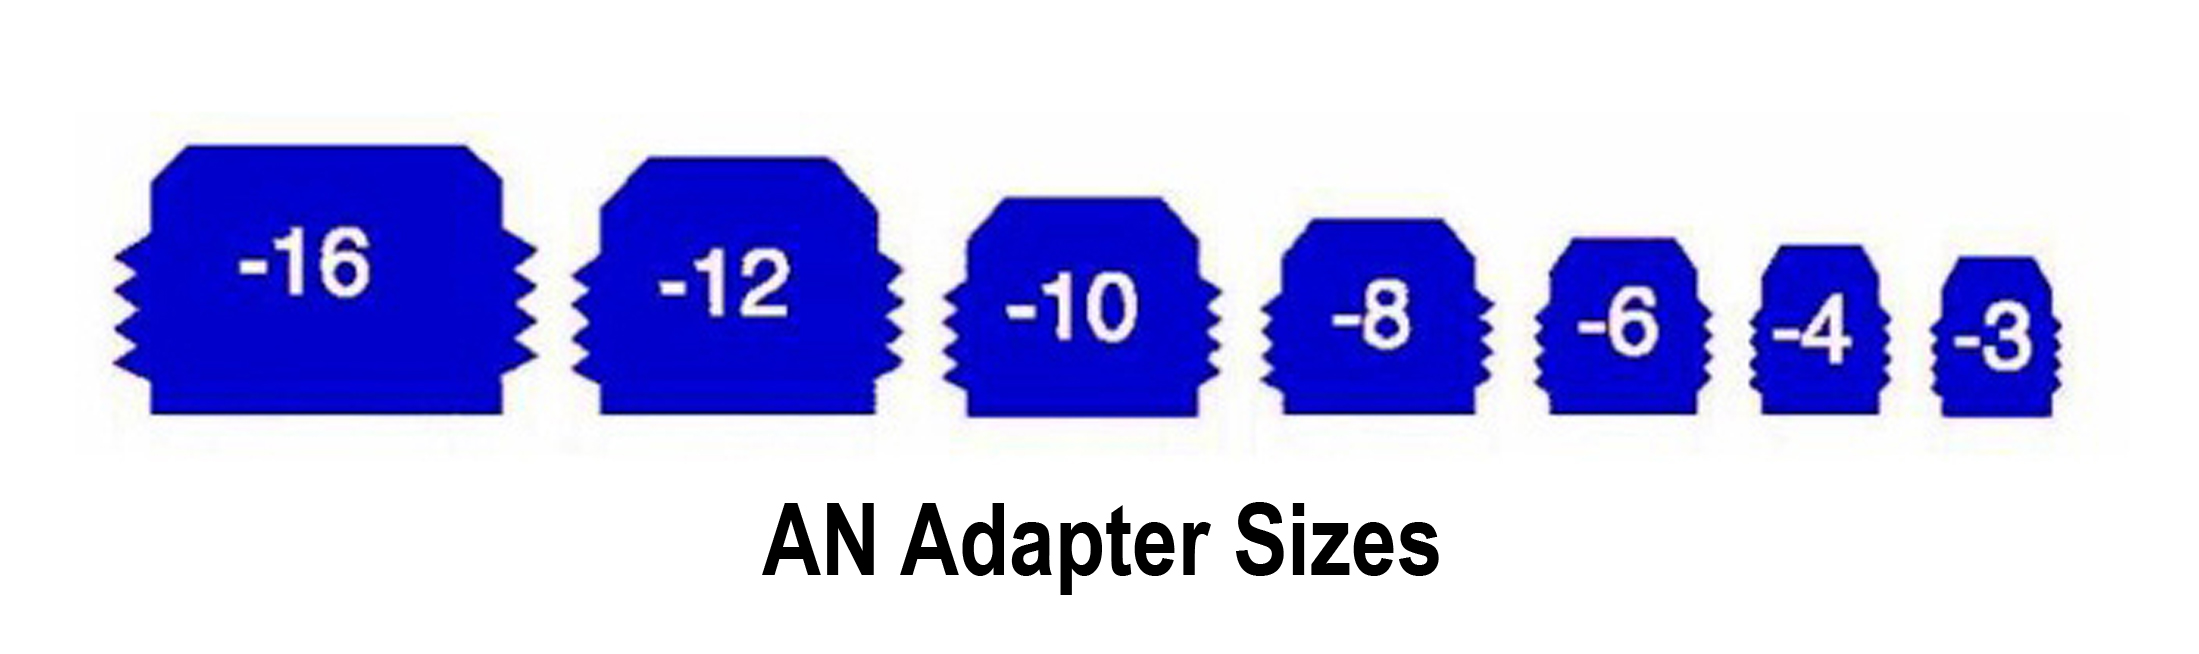 AN Adapter Sizes